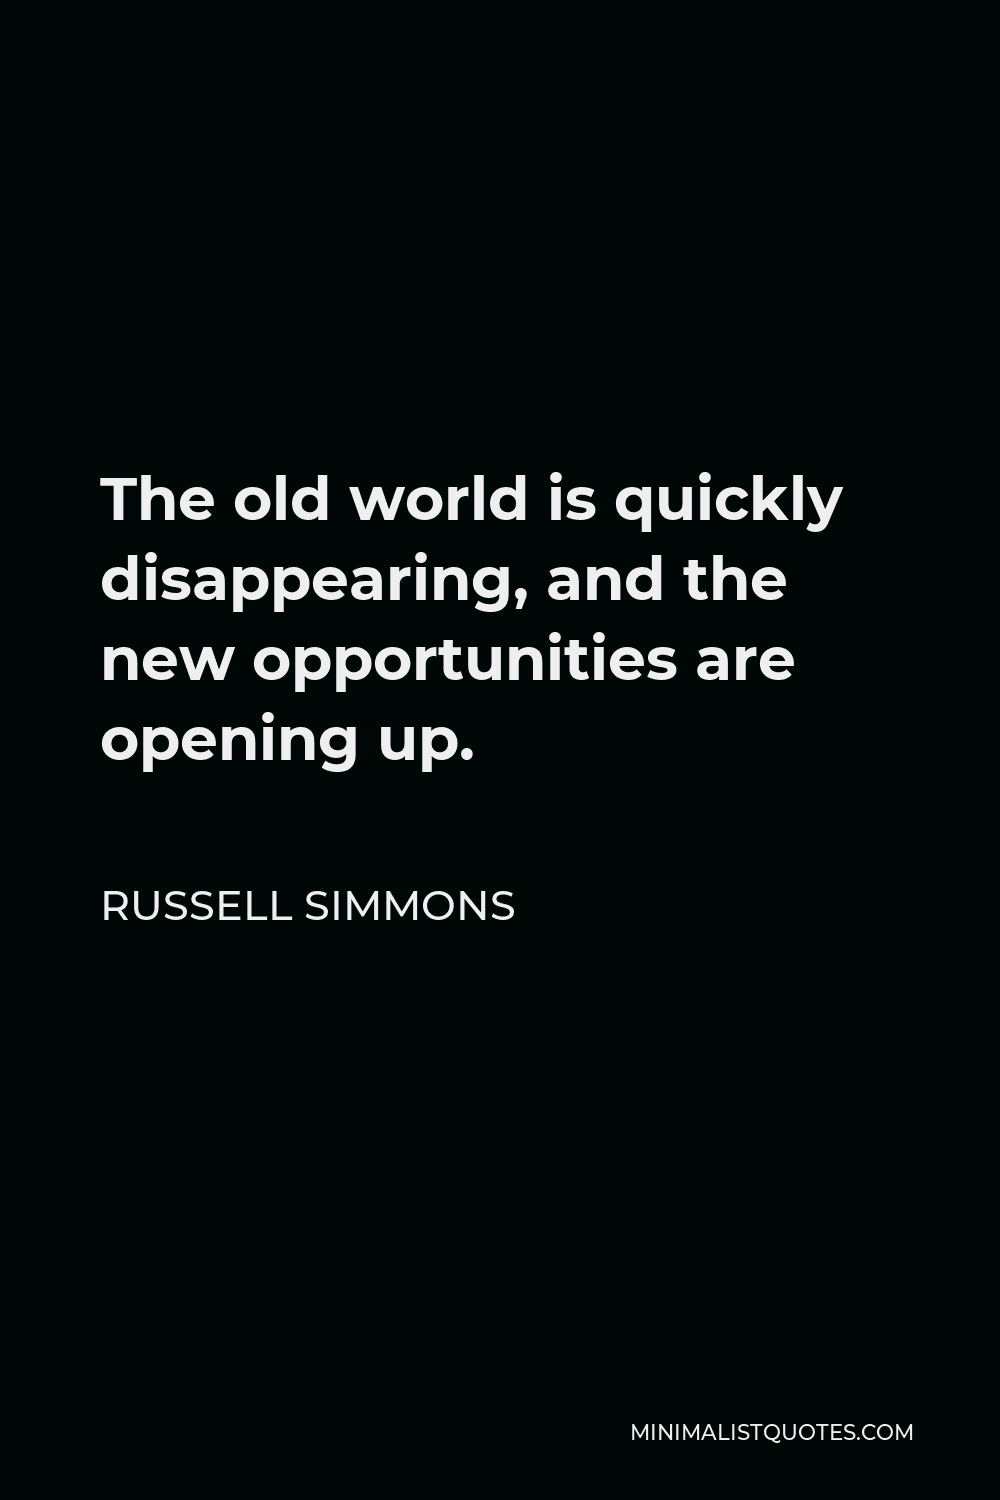 Russell Simmons Quote - The old world is quickly disappearing, and the new opportunities are opening up.